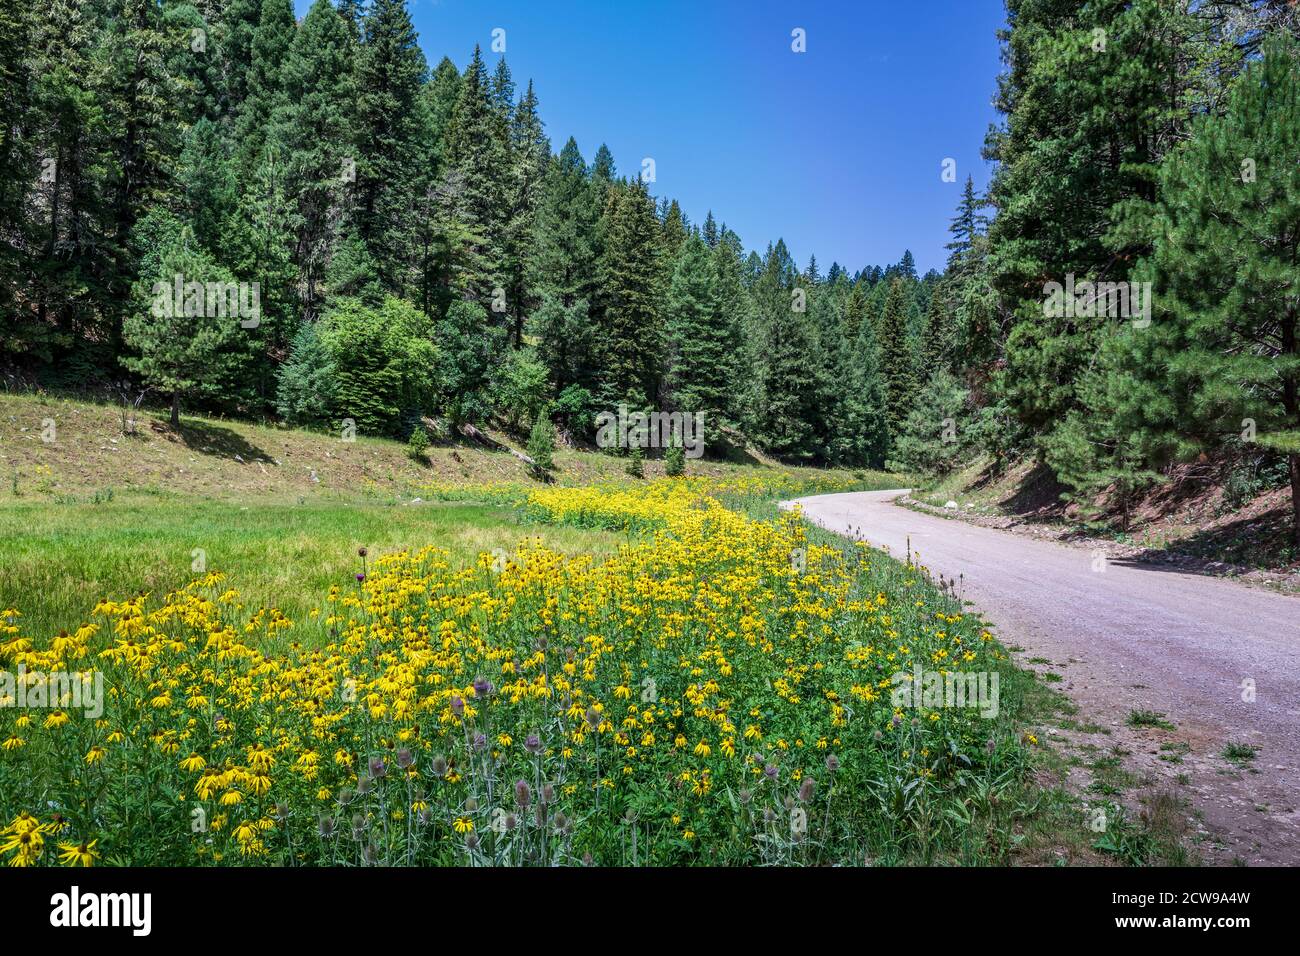 Cloudcroft, New Mexico, wildflowers in the Lincoln National Forest on US Highway 82. Stock Photo